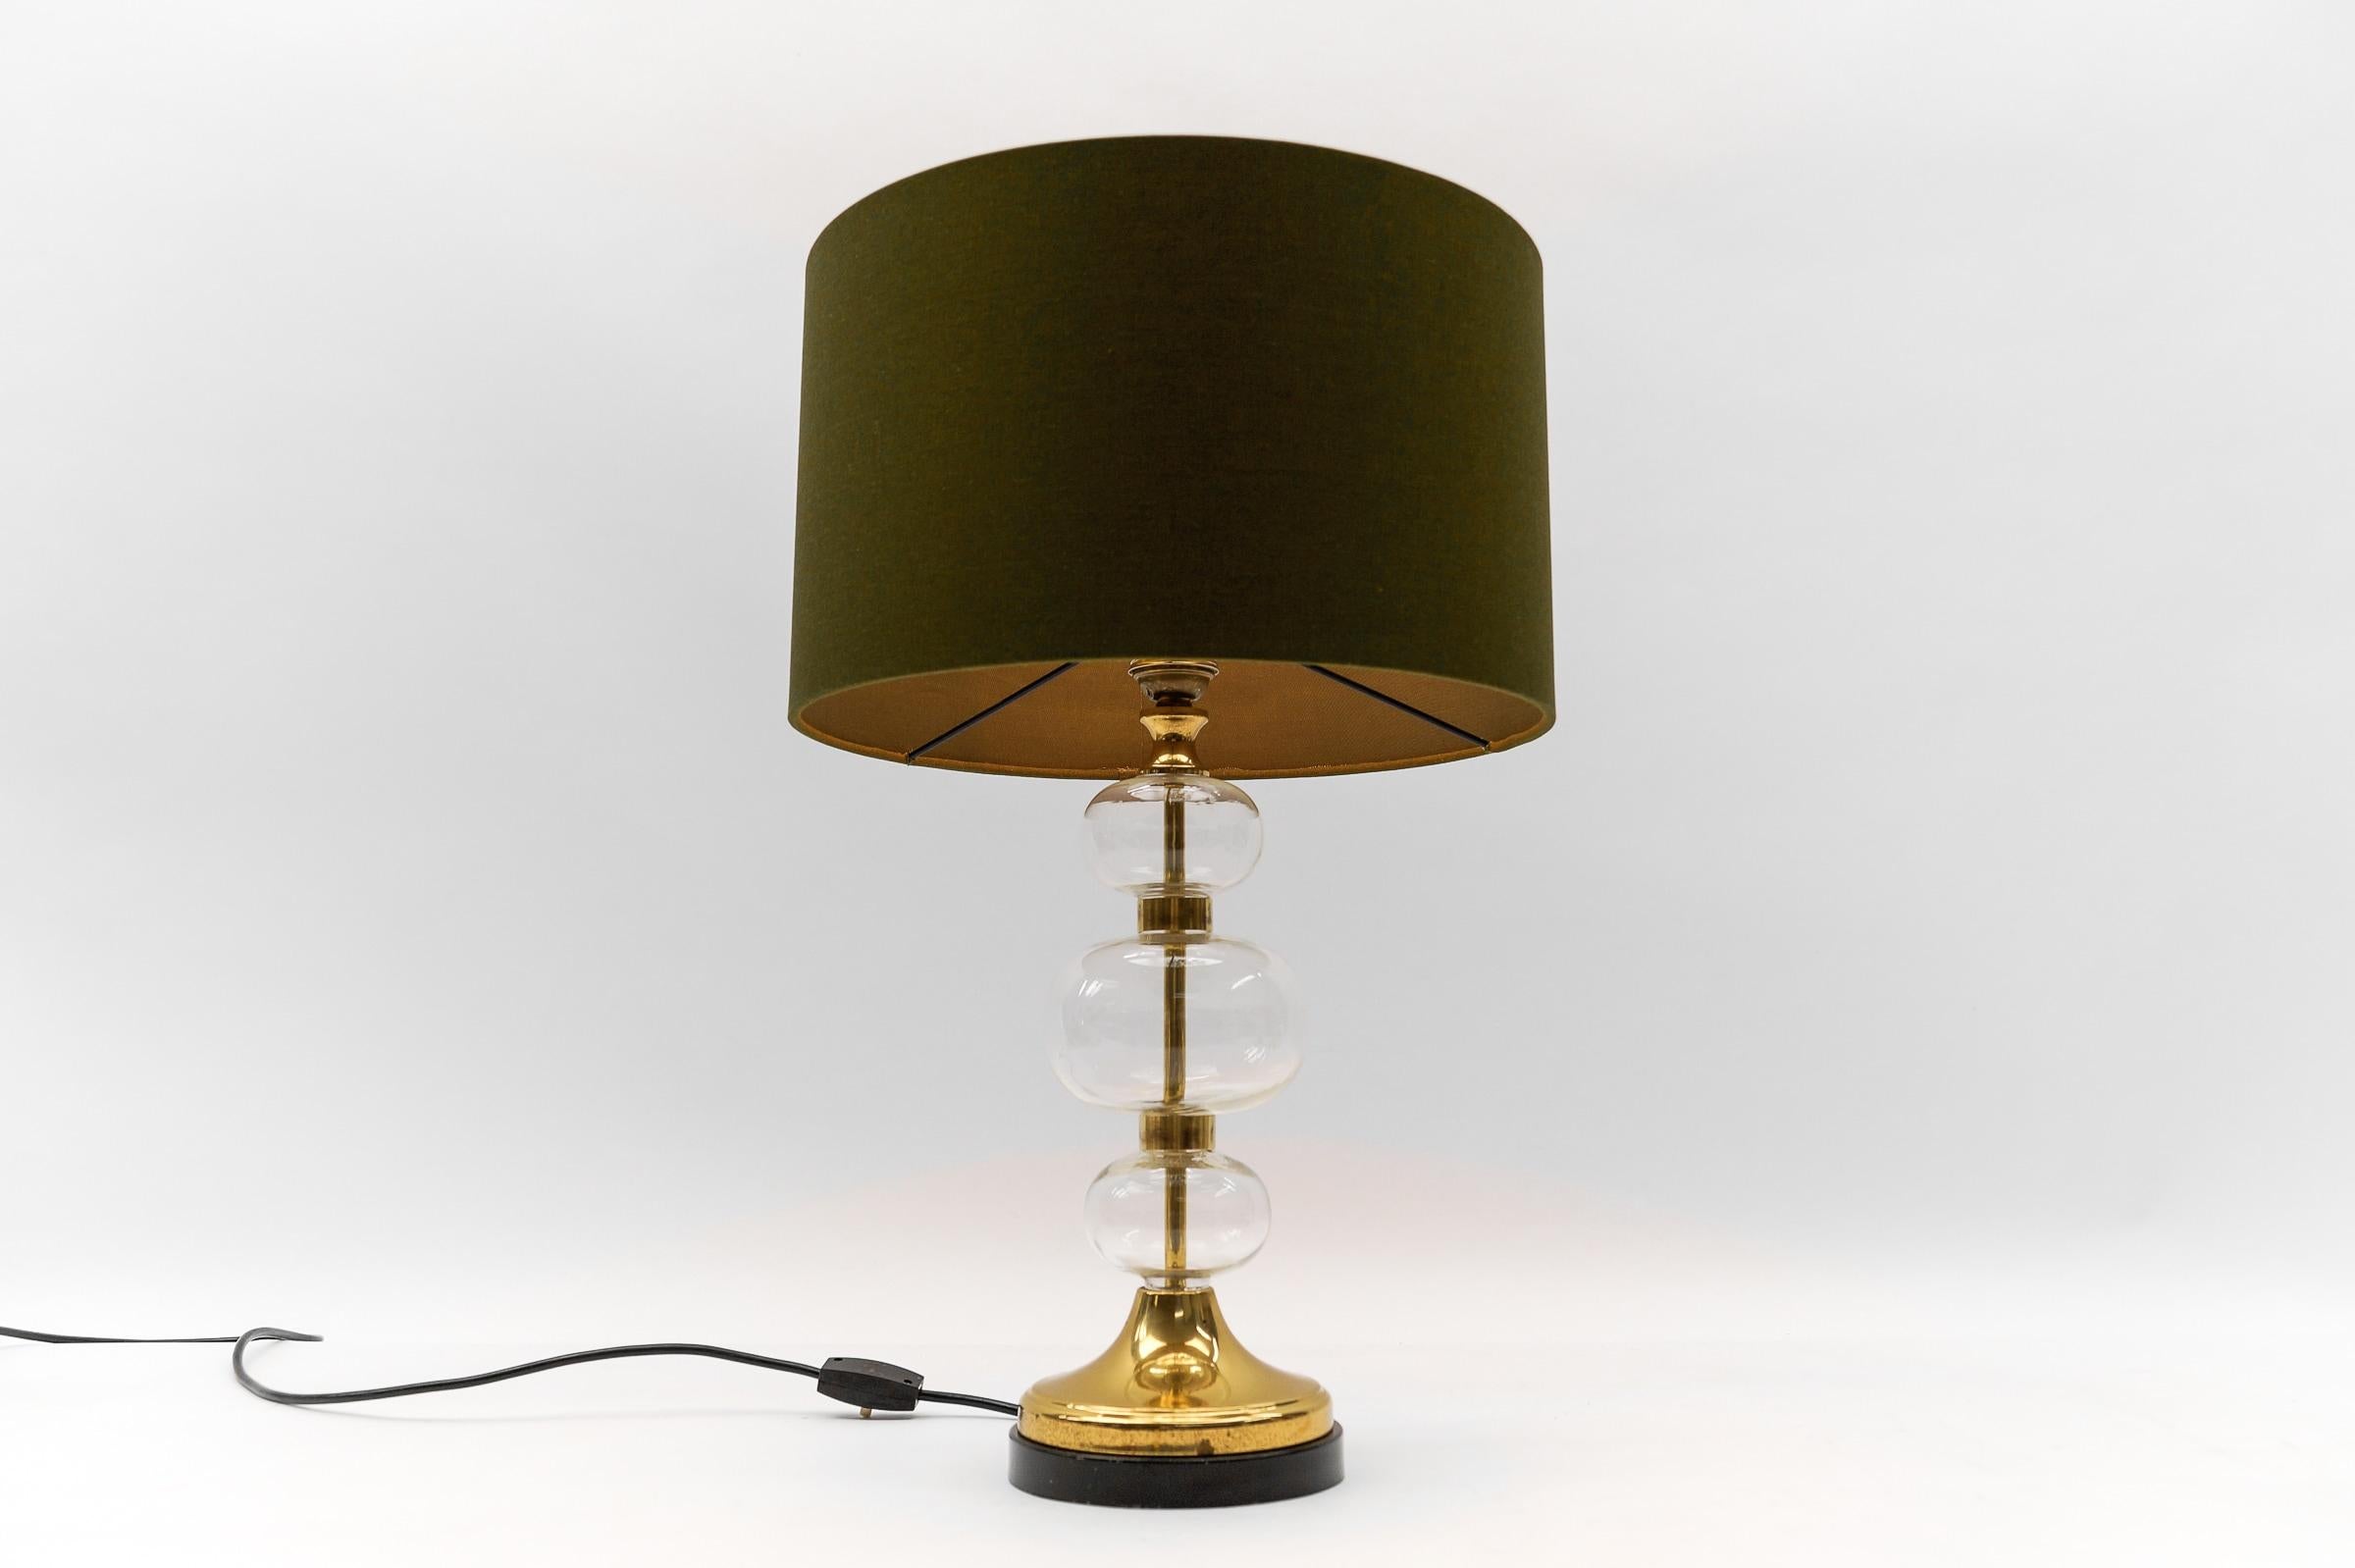 Mid Century Modern Brass & Bubble Glass Table Lamp Base, 1960s Germany

Dimensions
Diameter: 5.90 in. (15 cm)
Height: 16.14 in. (41 cm)

The lampshade is to illustrate how the lamp base looks with a shade. The shade has a diameter of 17.71 in. (45